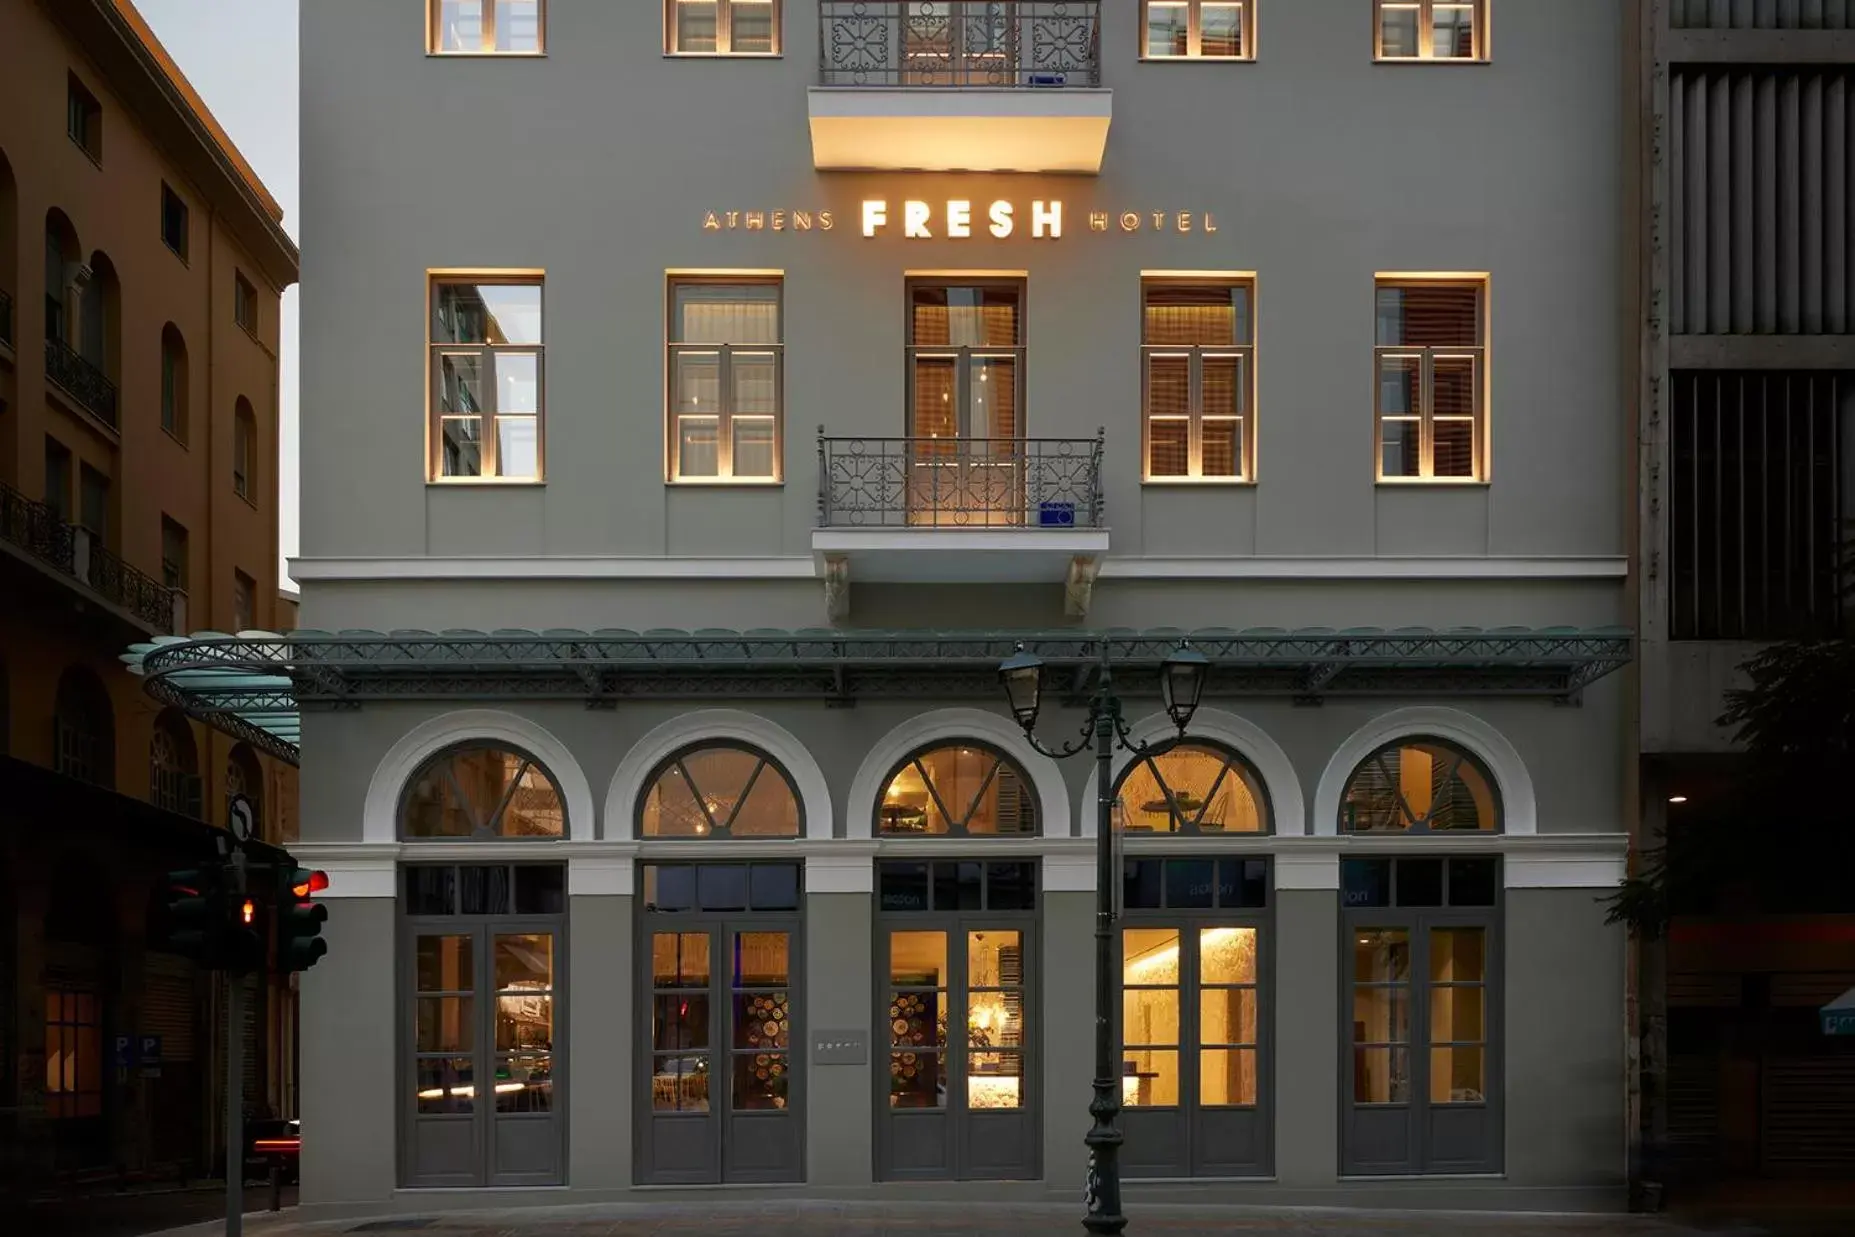 Property Building in Hotel Fresh